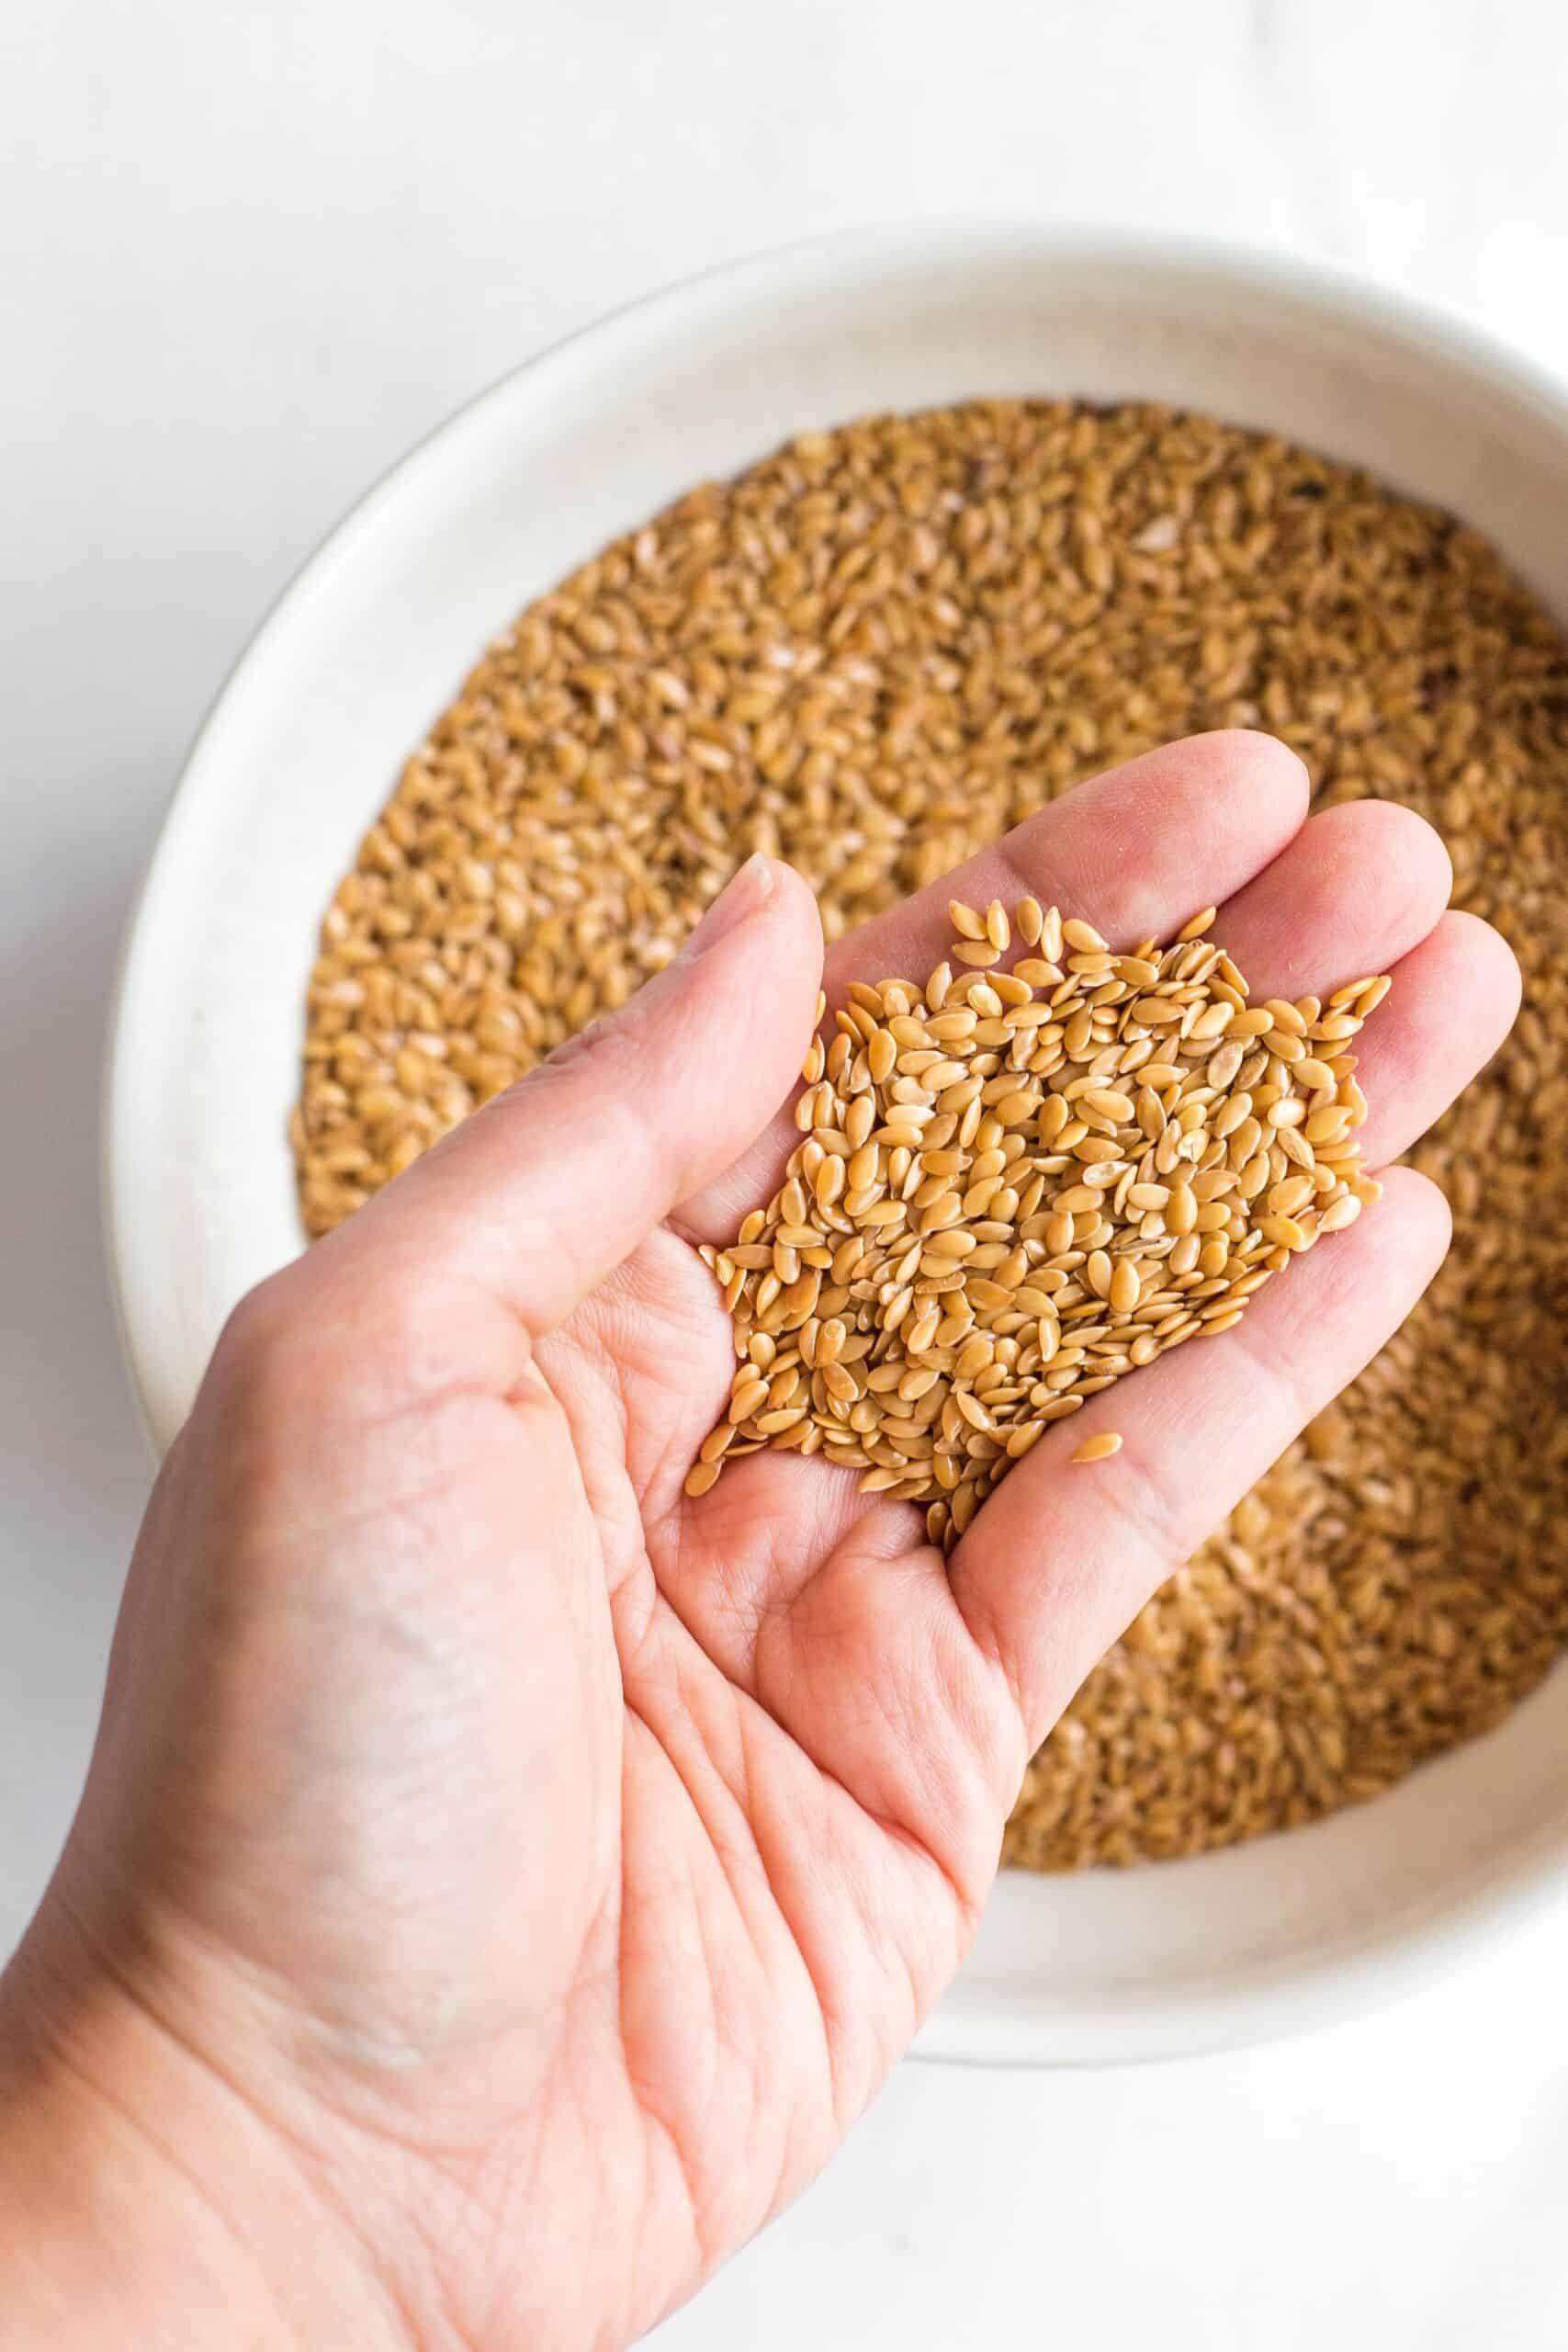 Hand holding up a handful of golden flax seeds from a bowl.